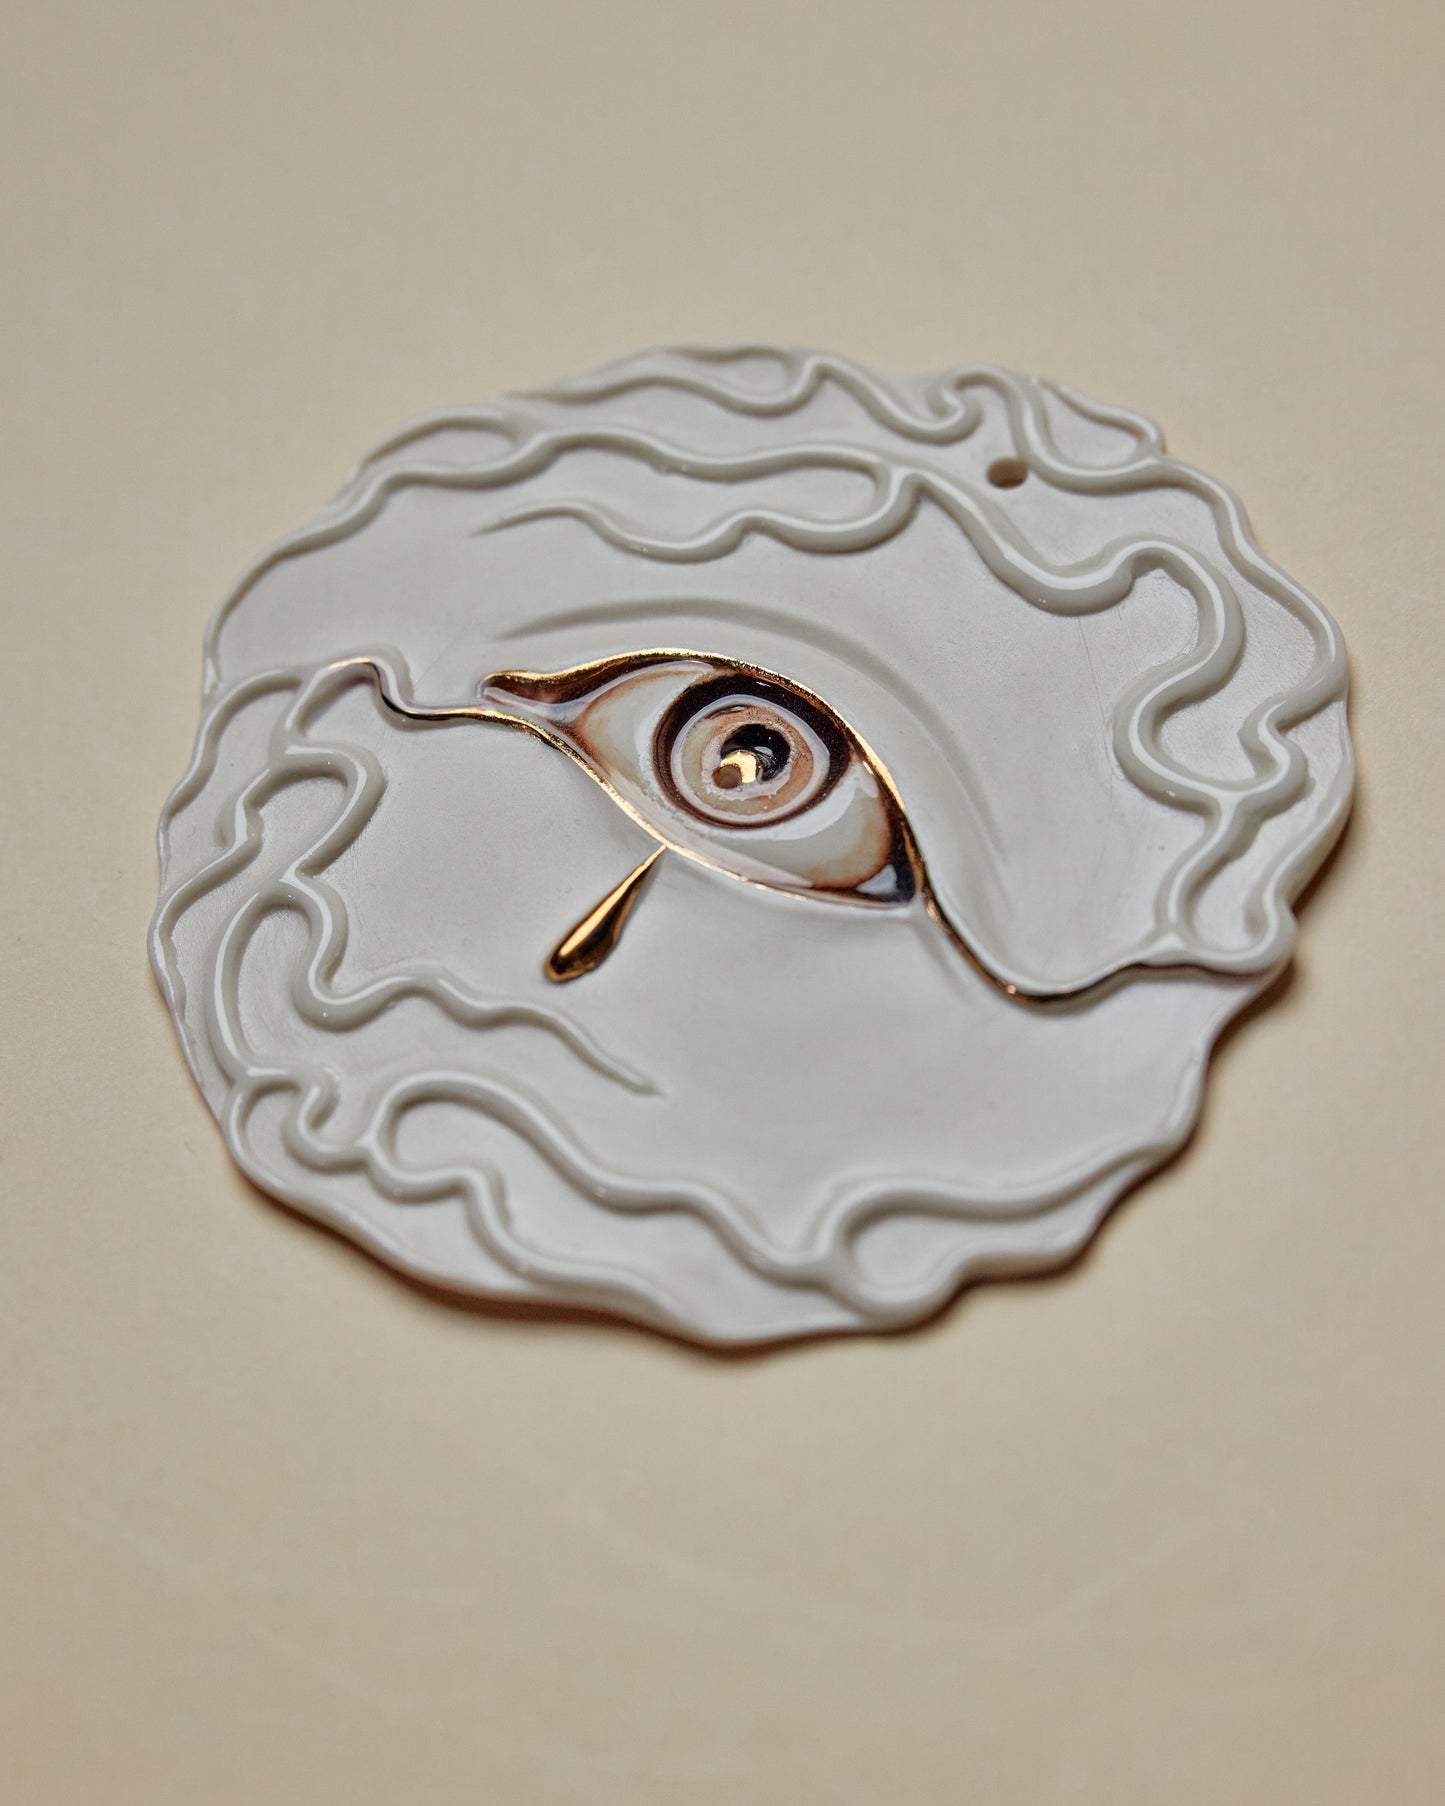 Flaming Eye Incense Holder / Wall Ornament 7 -  Hand crafted Porcelain Home Ornament. Circular ornament with Eye and Flame Border.